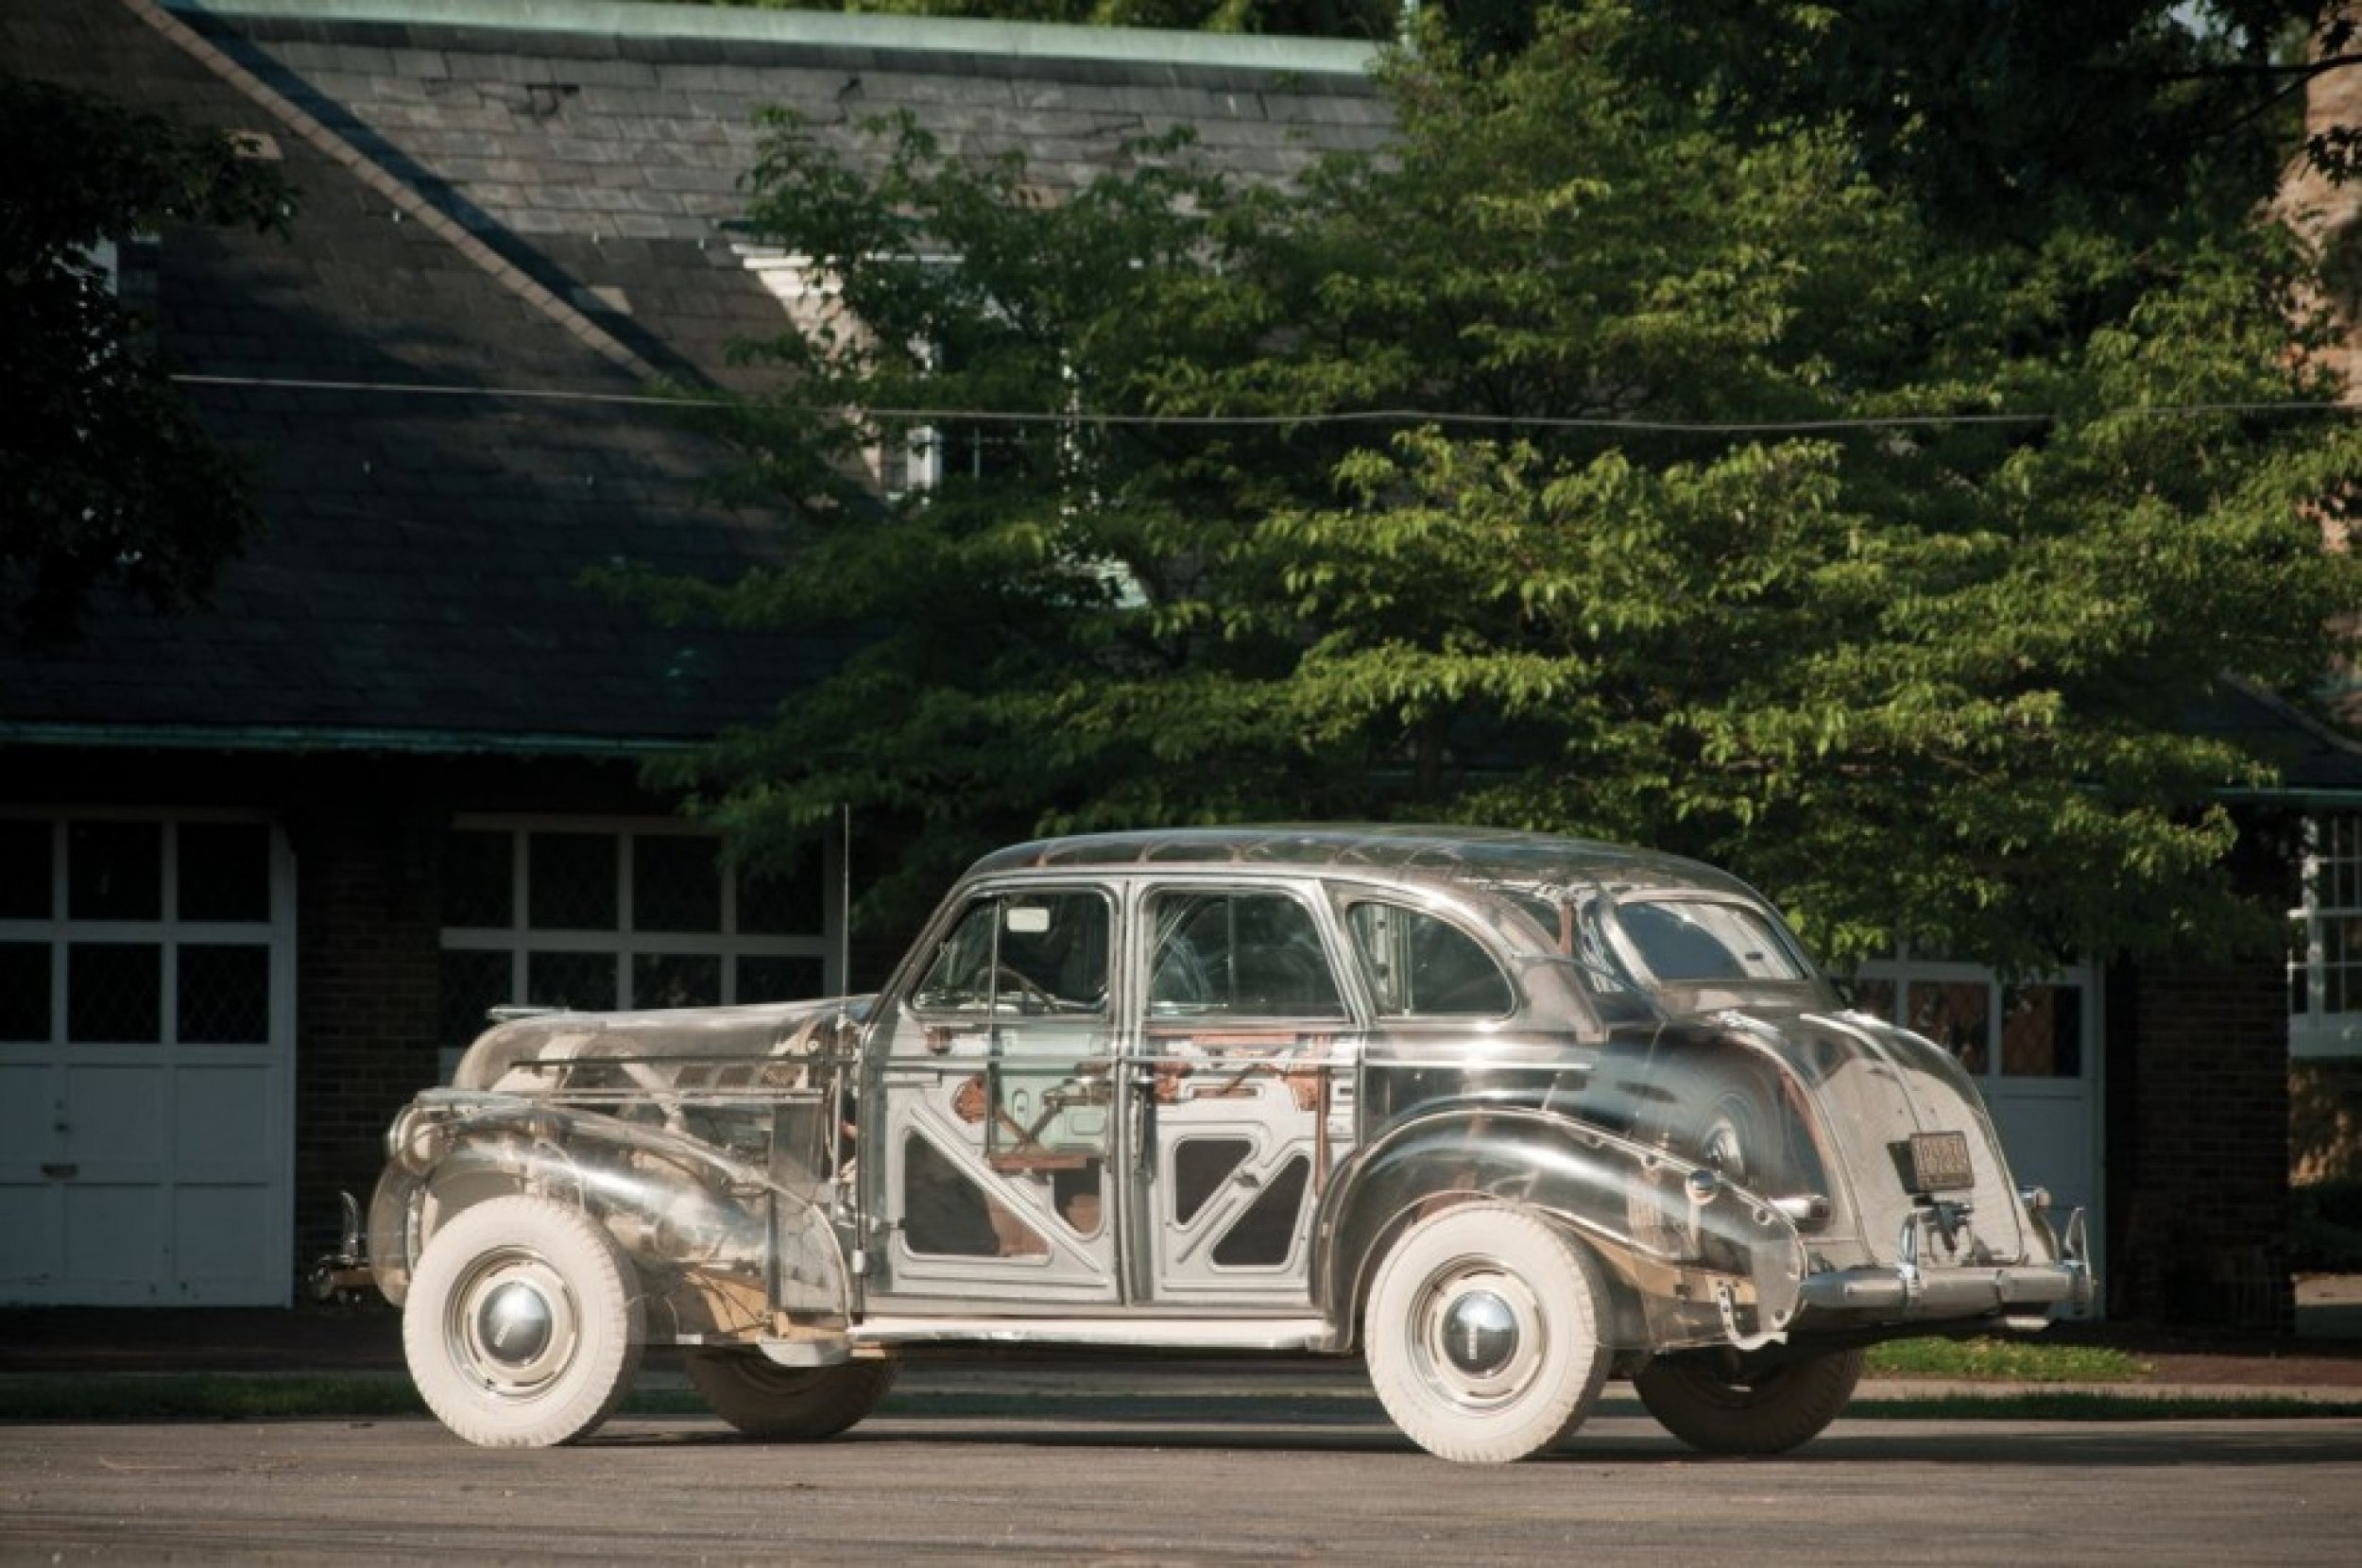 Worlds last Ghost Car estimated to fetch 500,000 at RM Auctions.